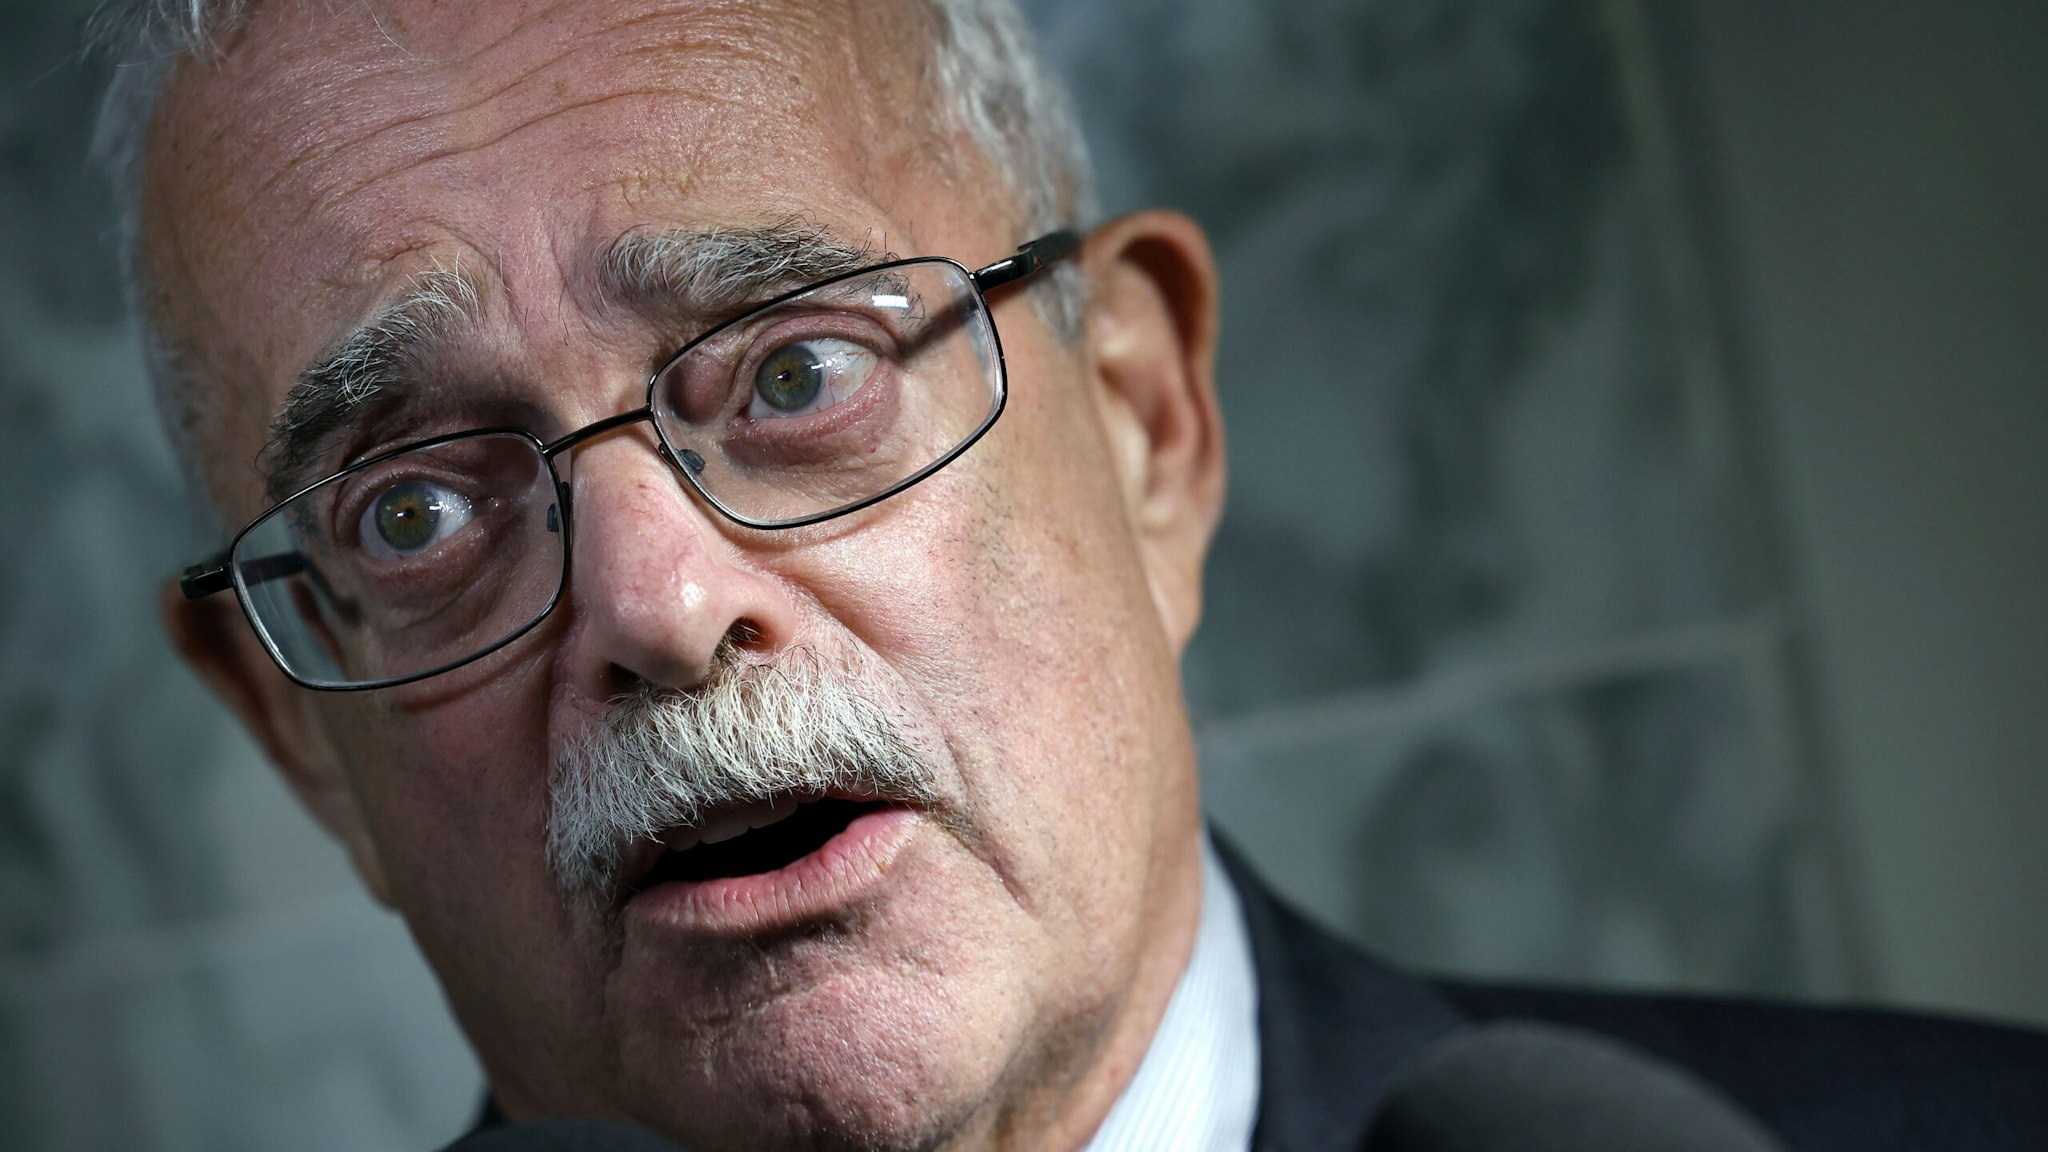 WASHINGTON, DC - MAY 16: U.S. Rep. Gerry Connolly (D-VA) speaks to reporters outside of a House Oversight Committee hearing on Washington, D.C. at the Rayburn House Office Building on May 16, 2023 in Washington, DC. Yesterday two of Connolly's staff members were attacked and injured by a man wielding a bat who came into his district office in Fairfax, Virginia.